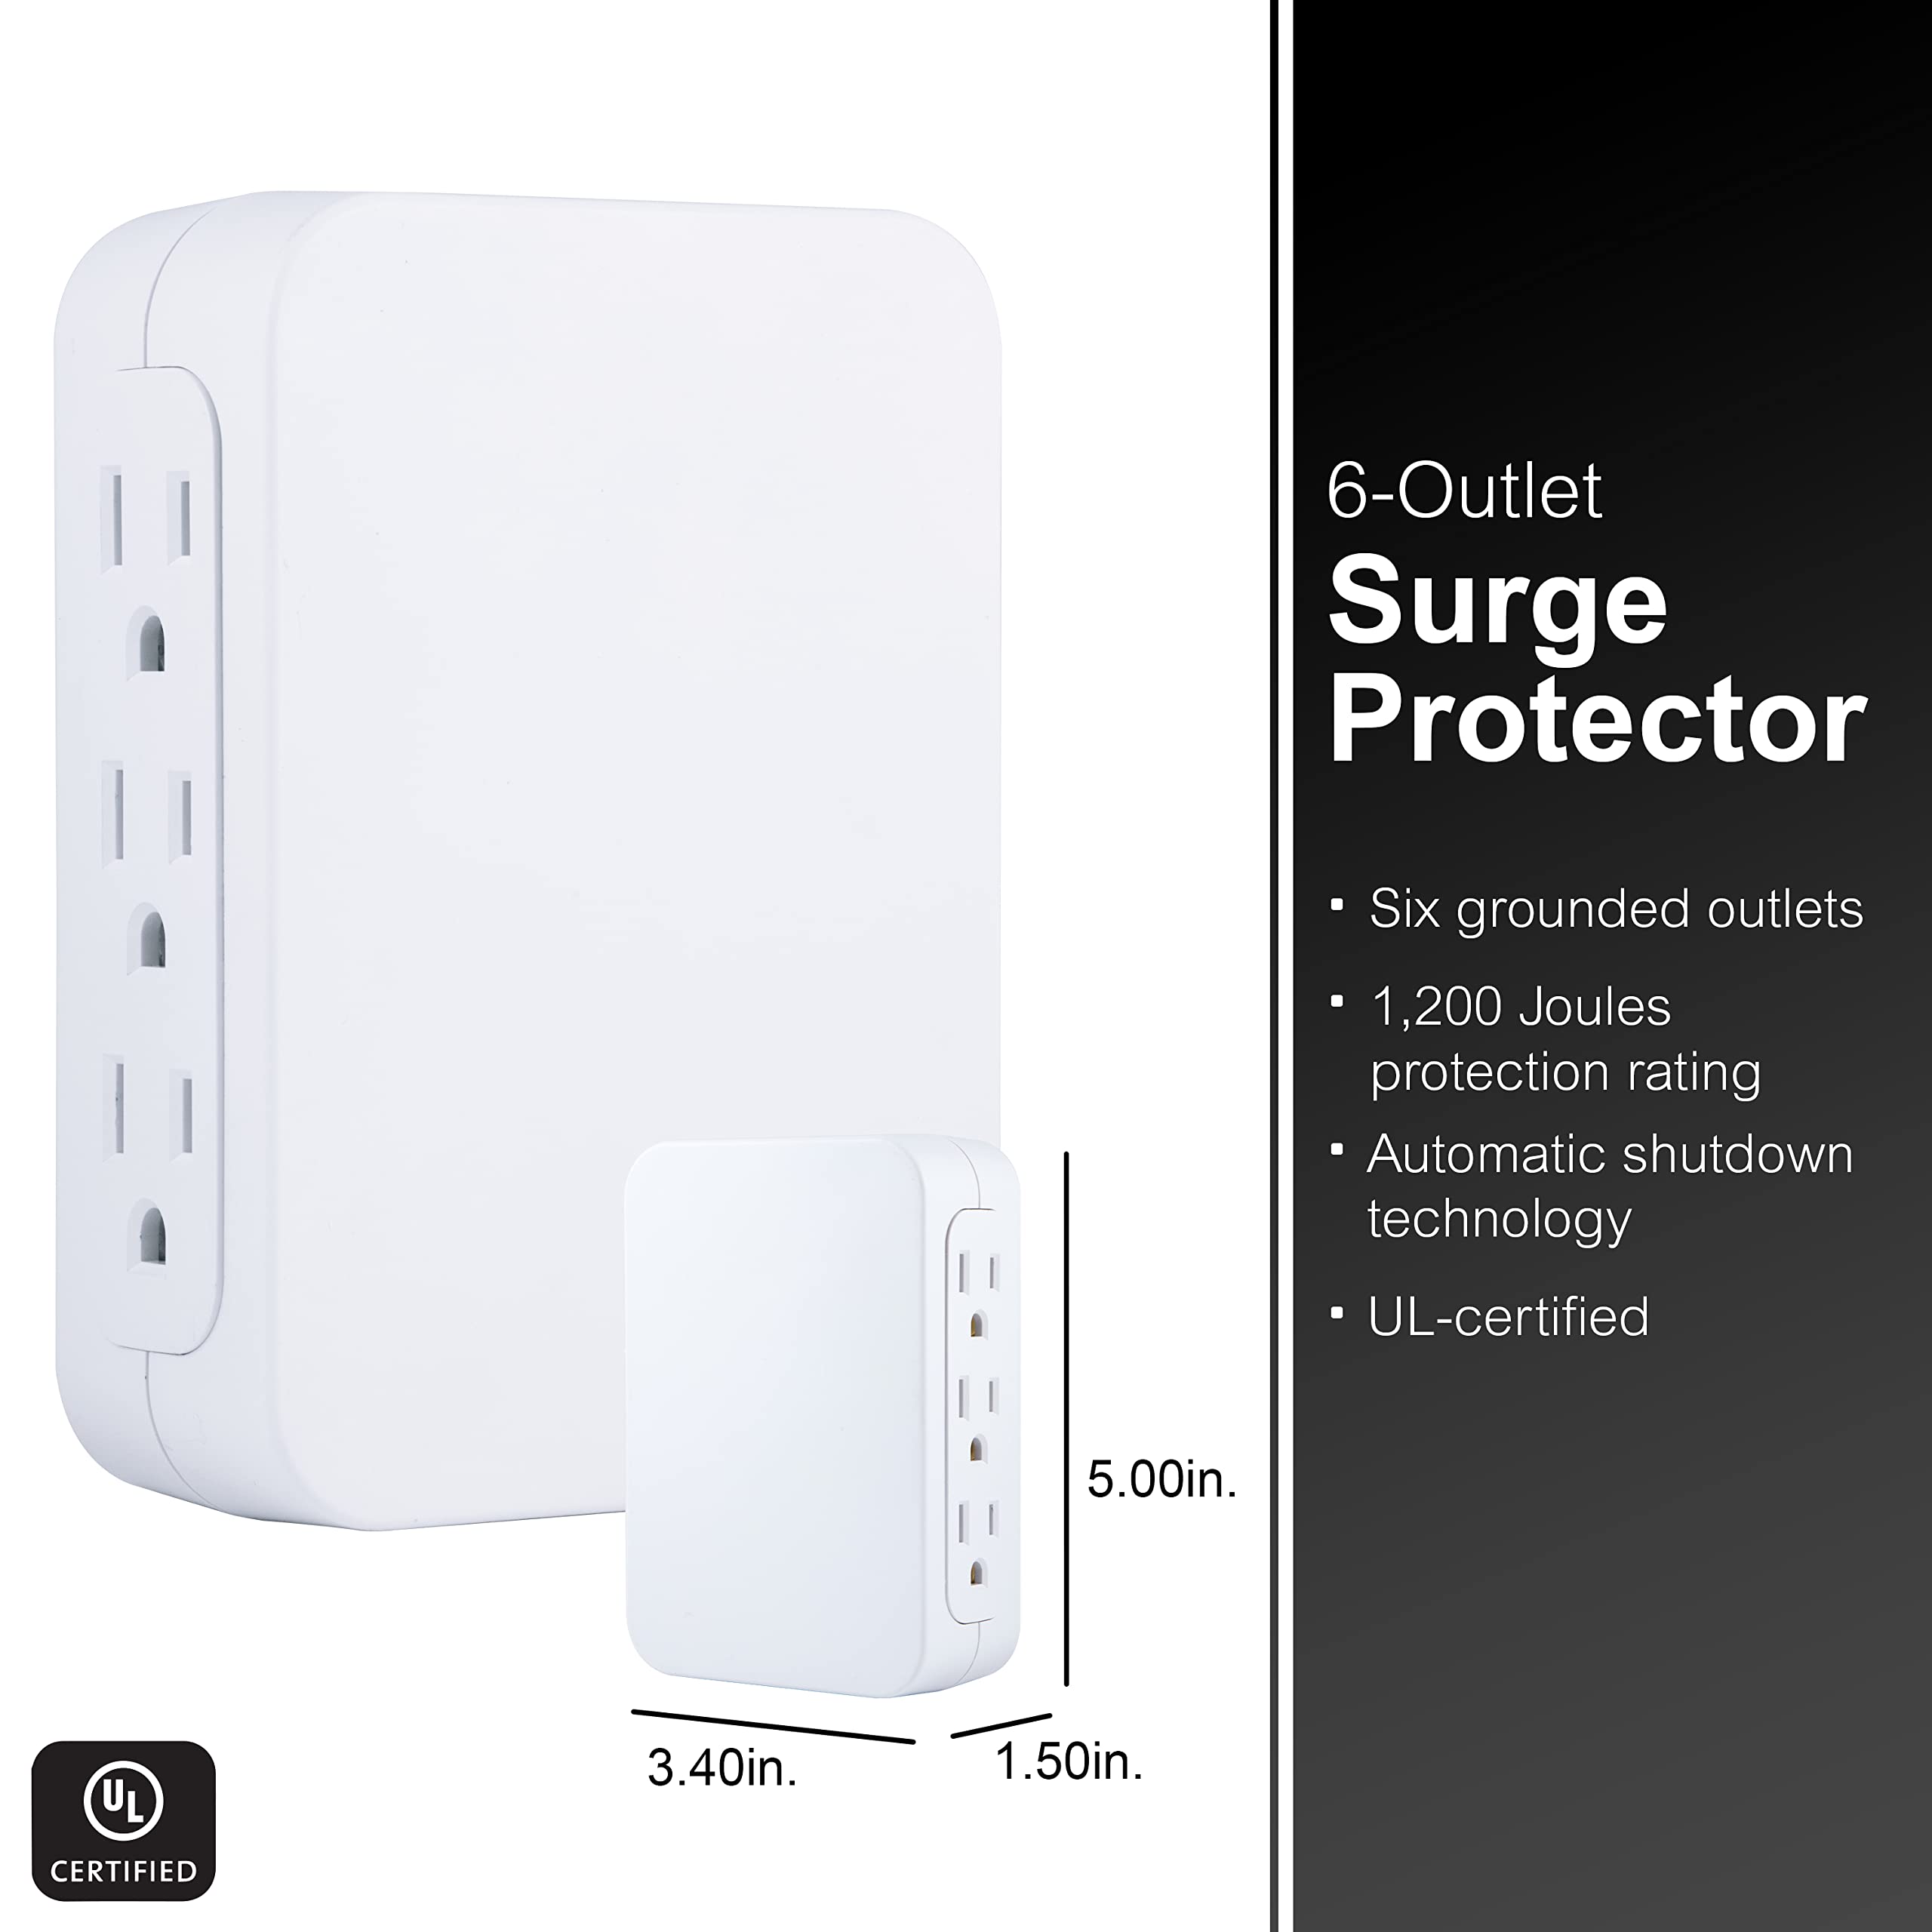 GE 6-Outlet Surge Protector, 10 Ft Extension Cord, Power Strip, 800 Joules, Flat Plug & Pro 6-Outlet Extender, Surge Protector, Side Access, Wall Tap Adapter